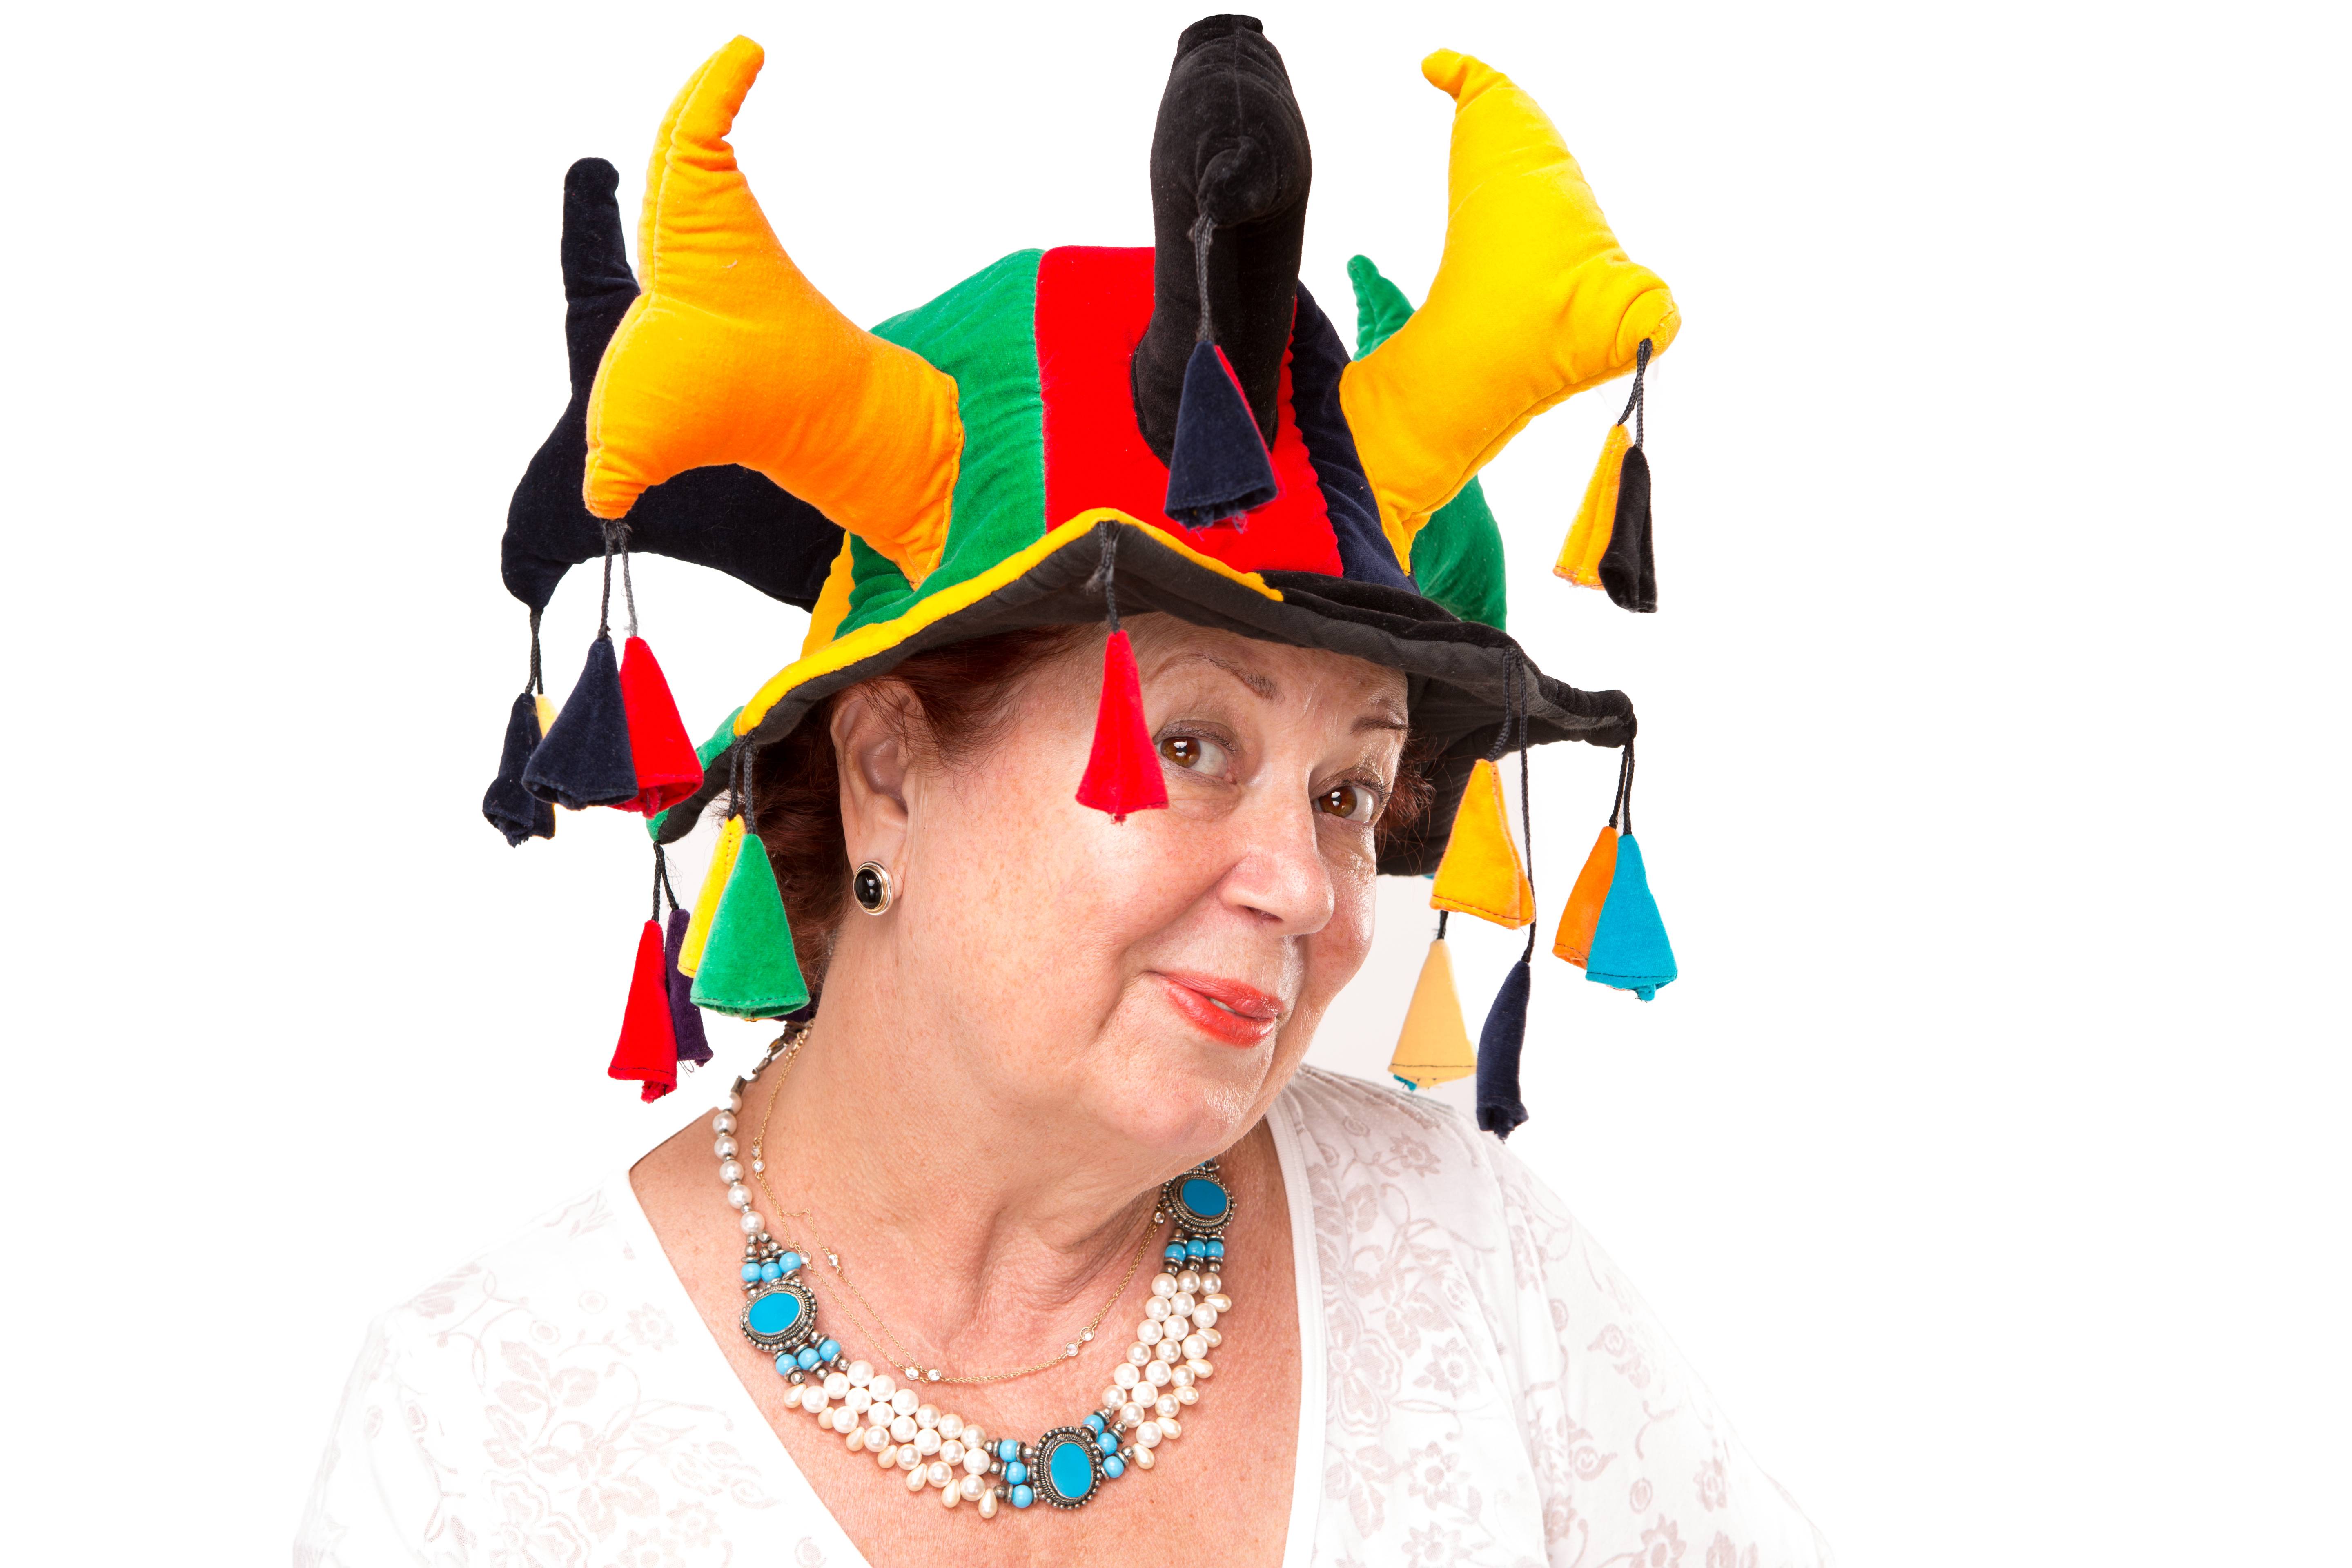 Senior Lady with Jester’s Hat